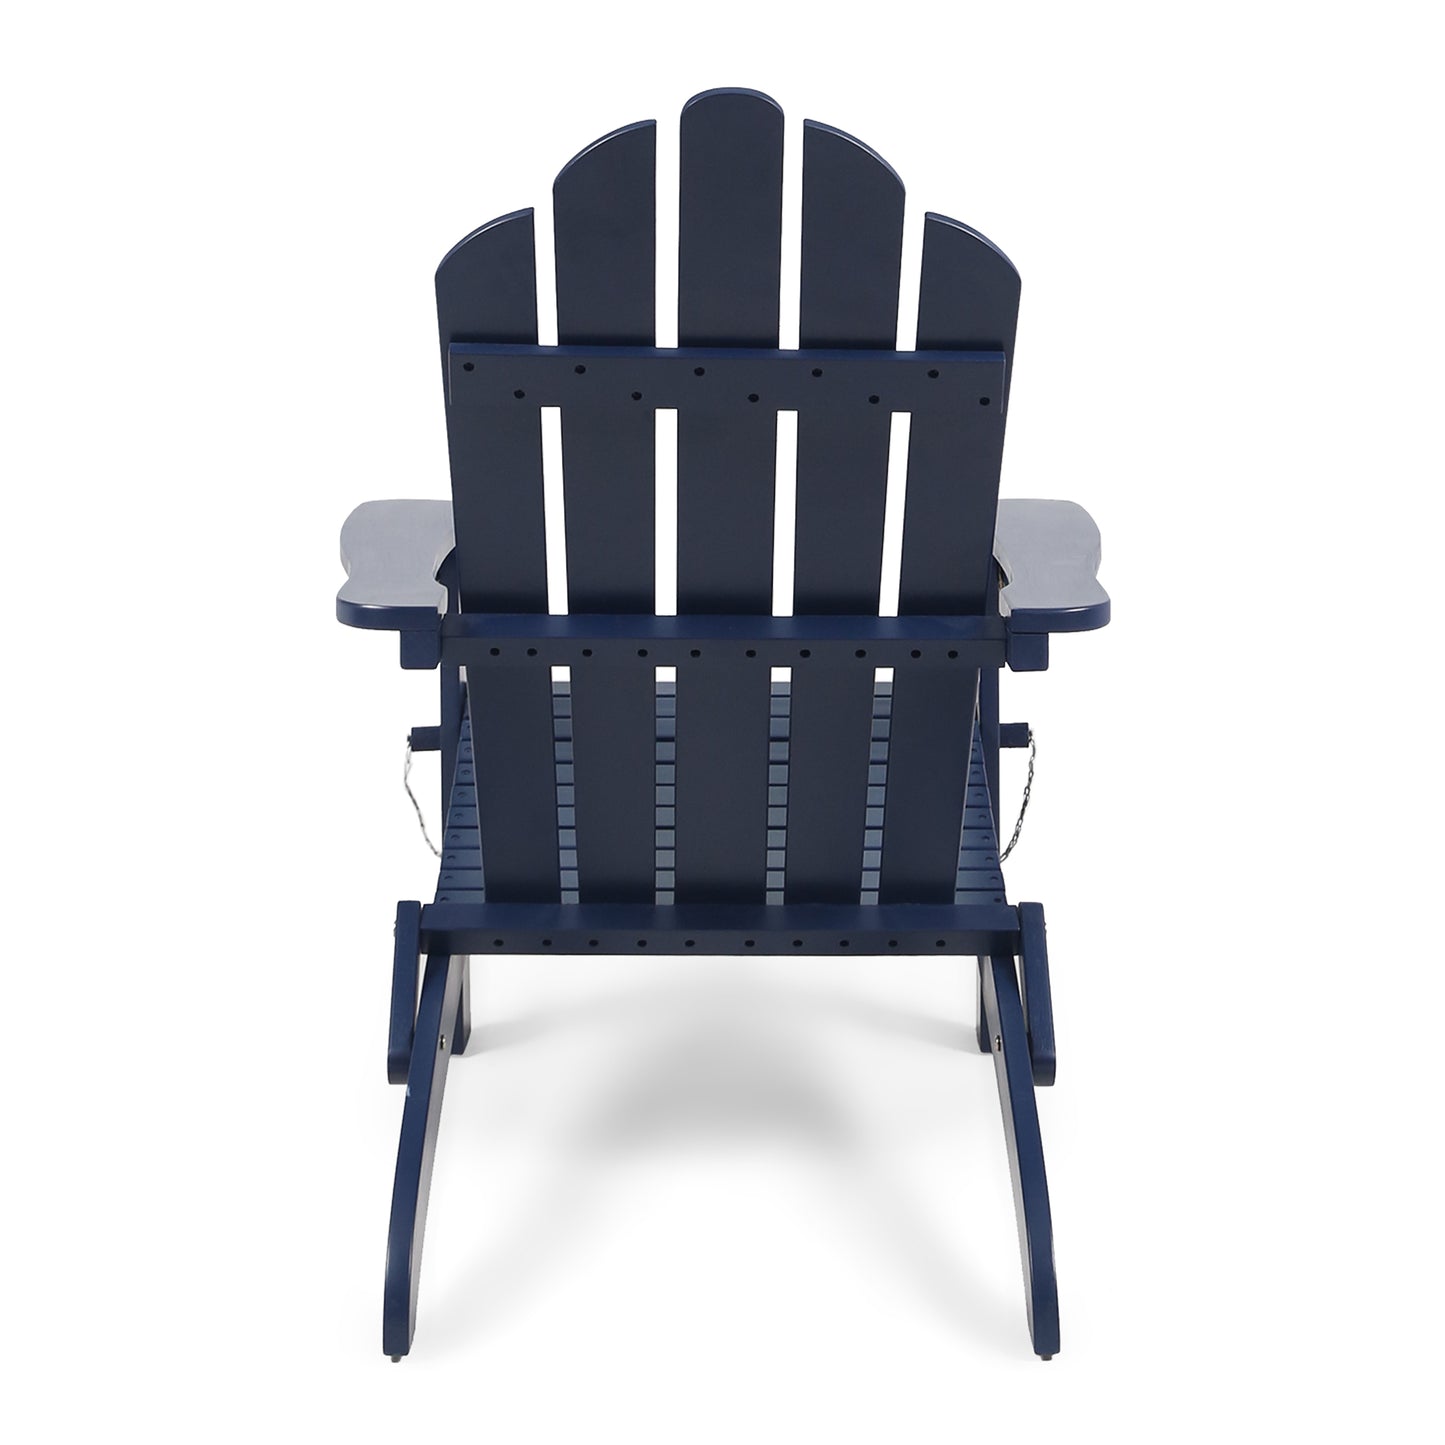 Outdoor foldable solid wood ADIRONDACK chair dark blue